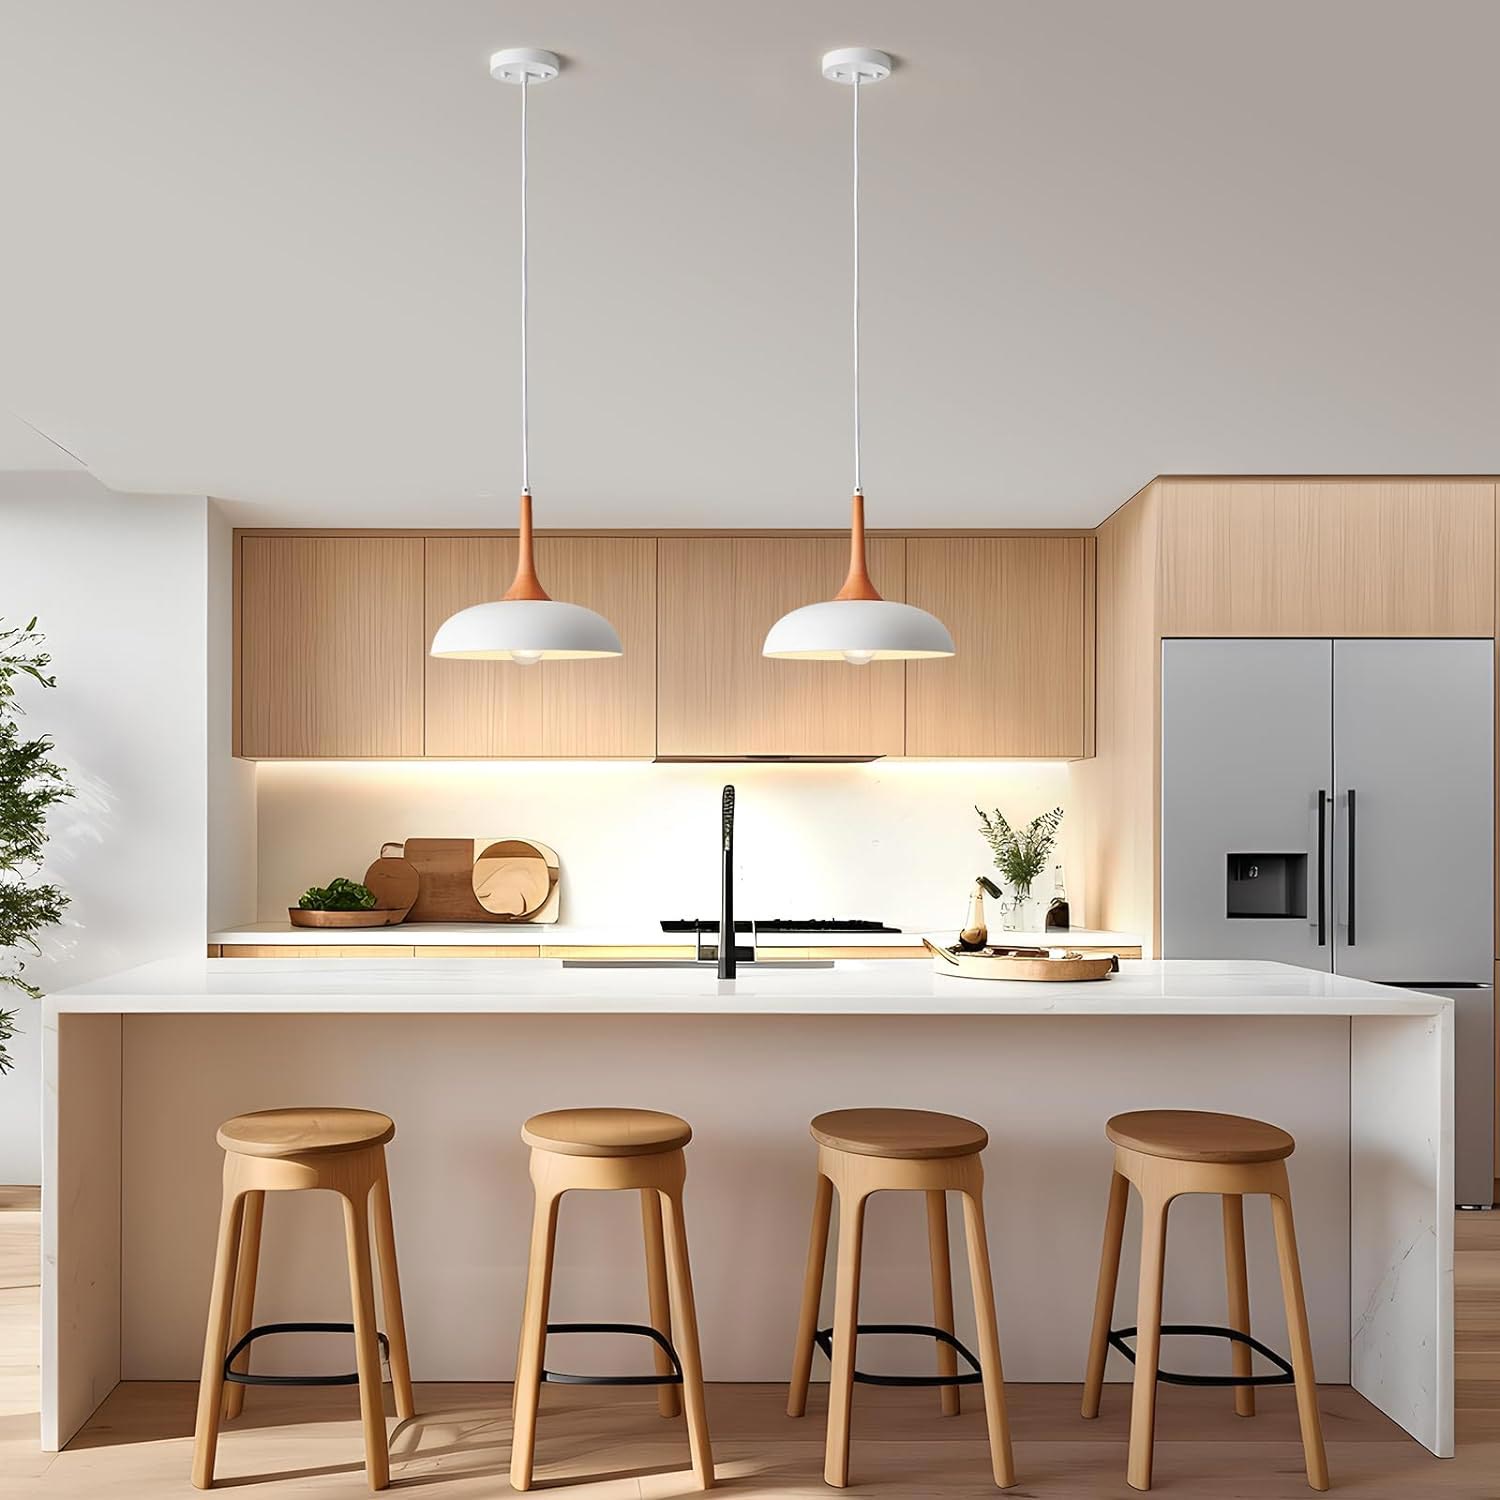 Kitchen with light wooden cabinets, chairs, and two white pendant lamps